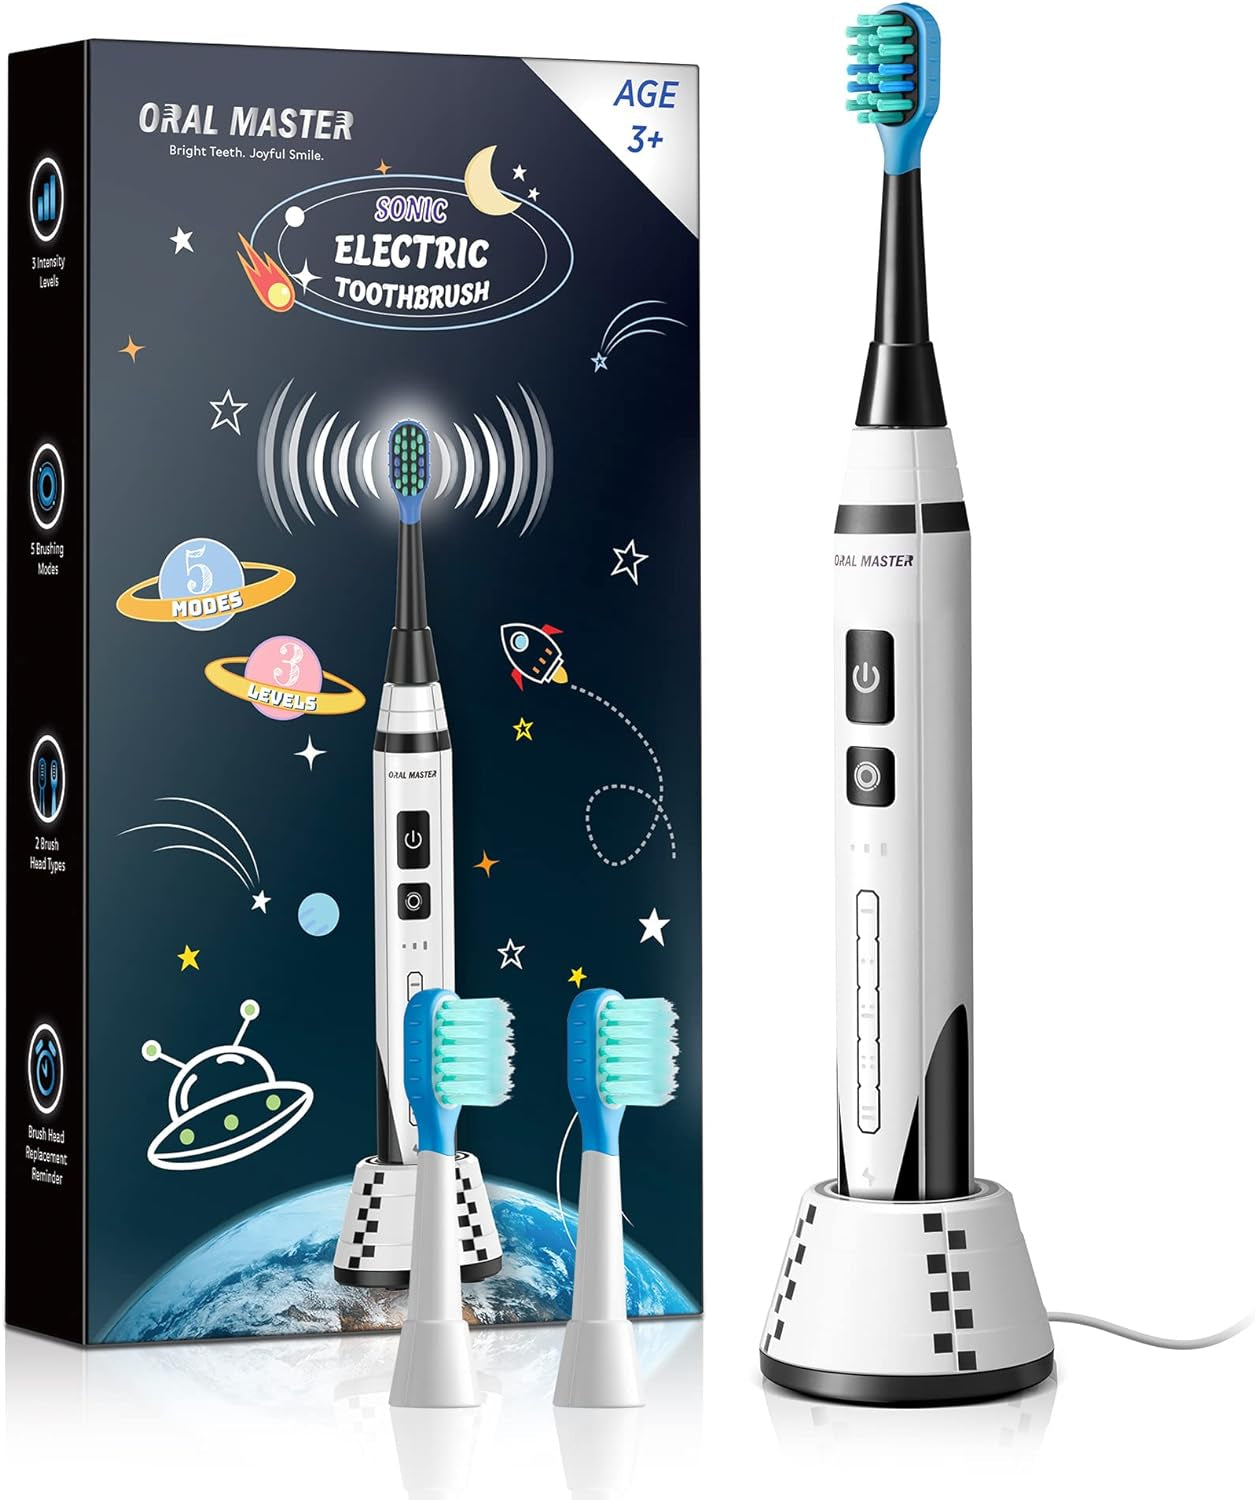 Electric Toothbrush for Kids, Sonic Rechargeable Toothbrush with 5 Modes and 36,000 VPM, 3 Soft Brush Heads Travel Electric Toothbrush Fast Charge for 30 Days, Ideal Gift for Kids Age 3+